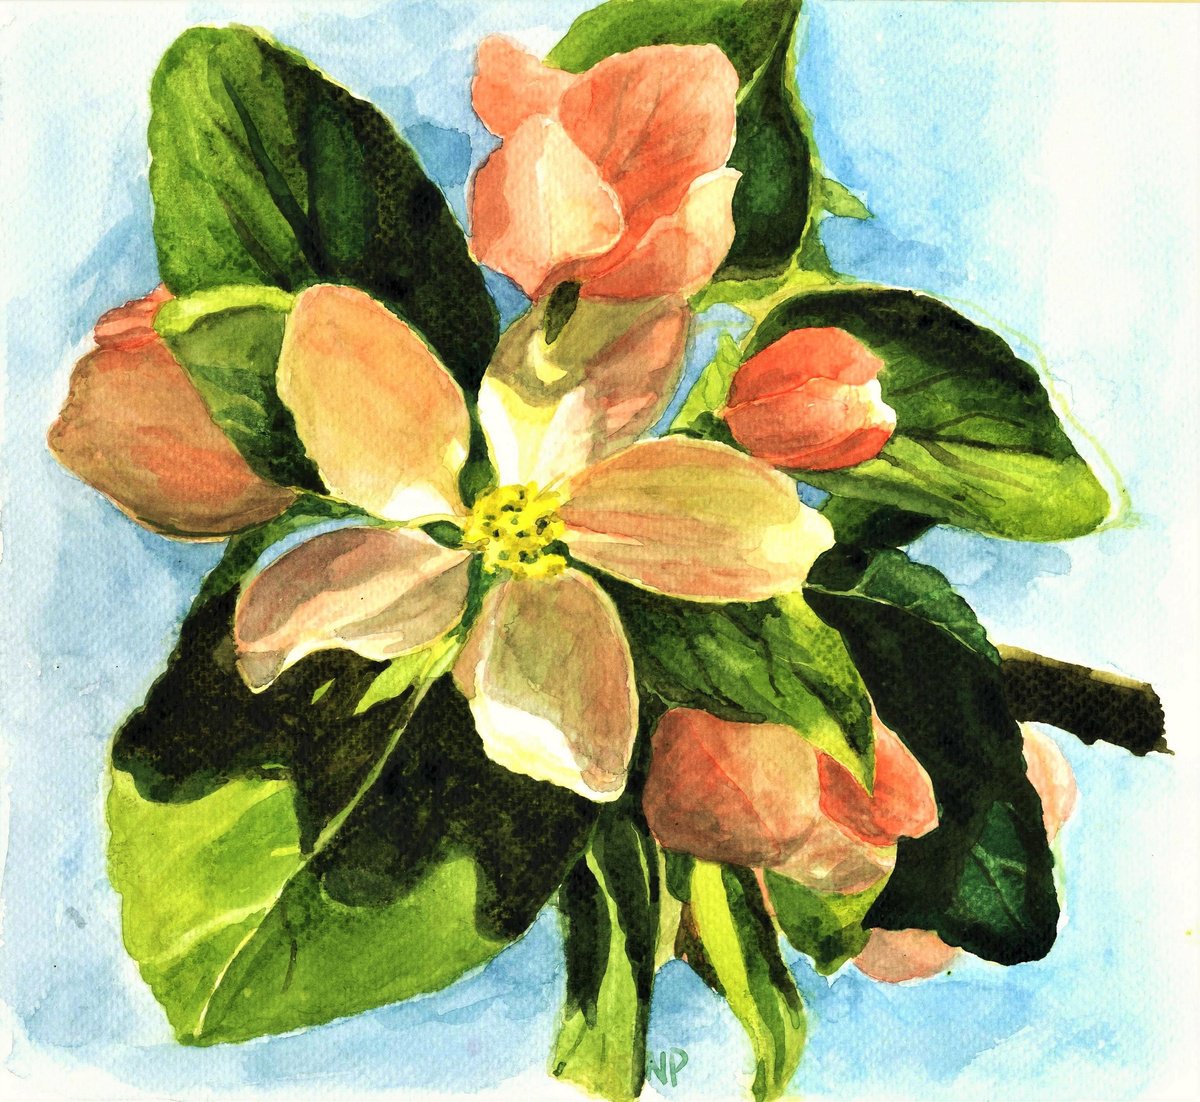 APPLE FLOWER by Nives Palmic